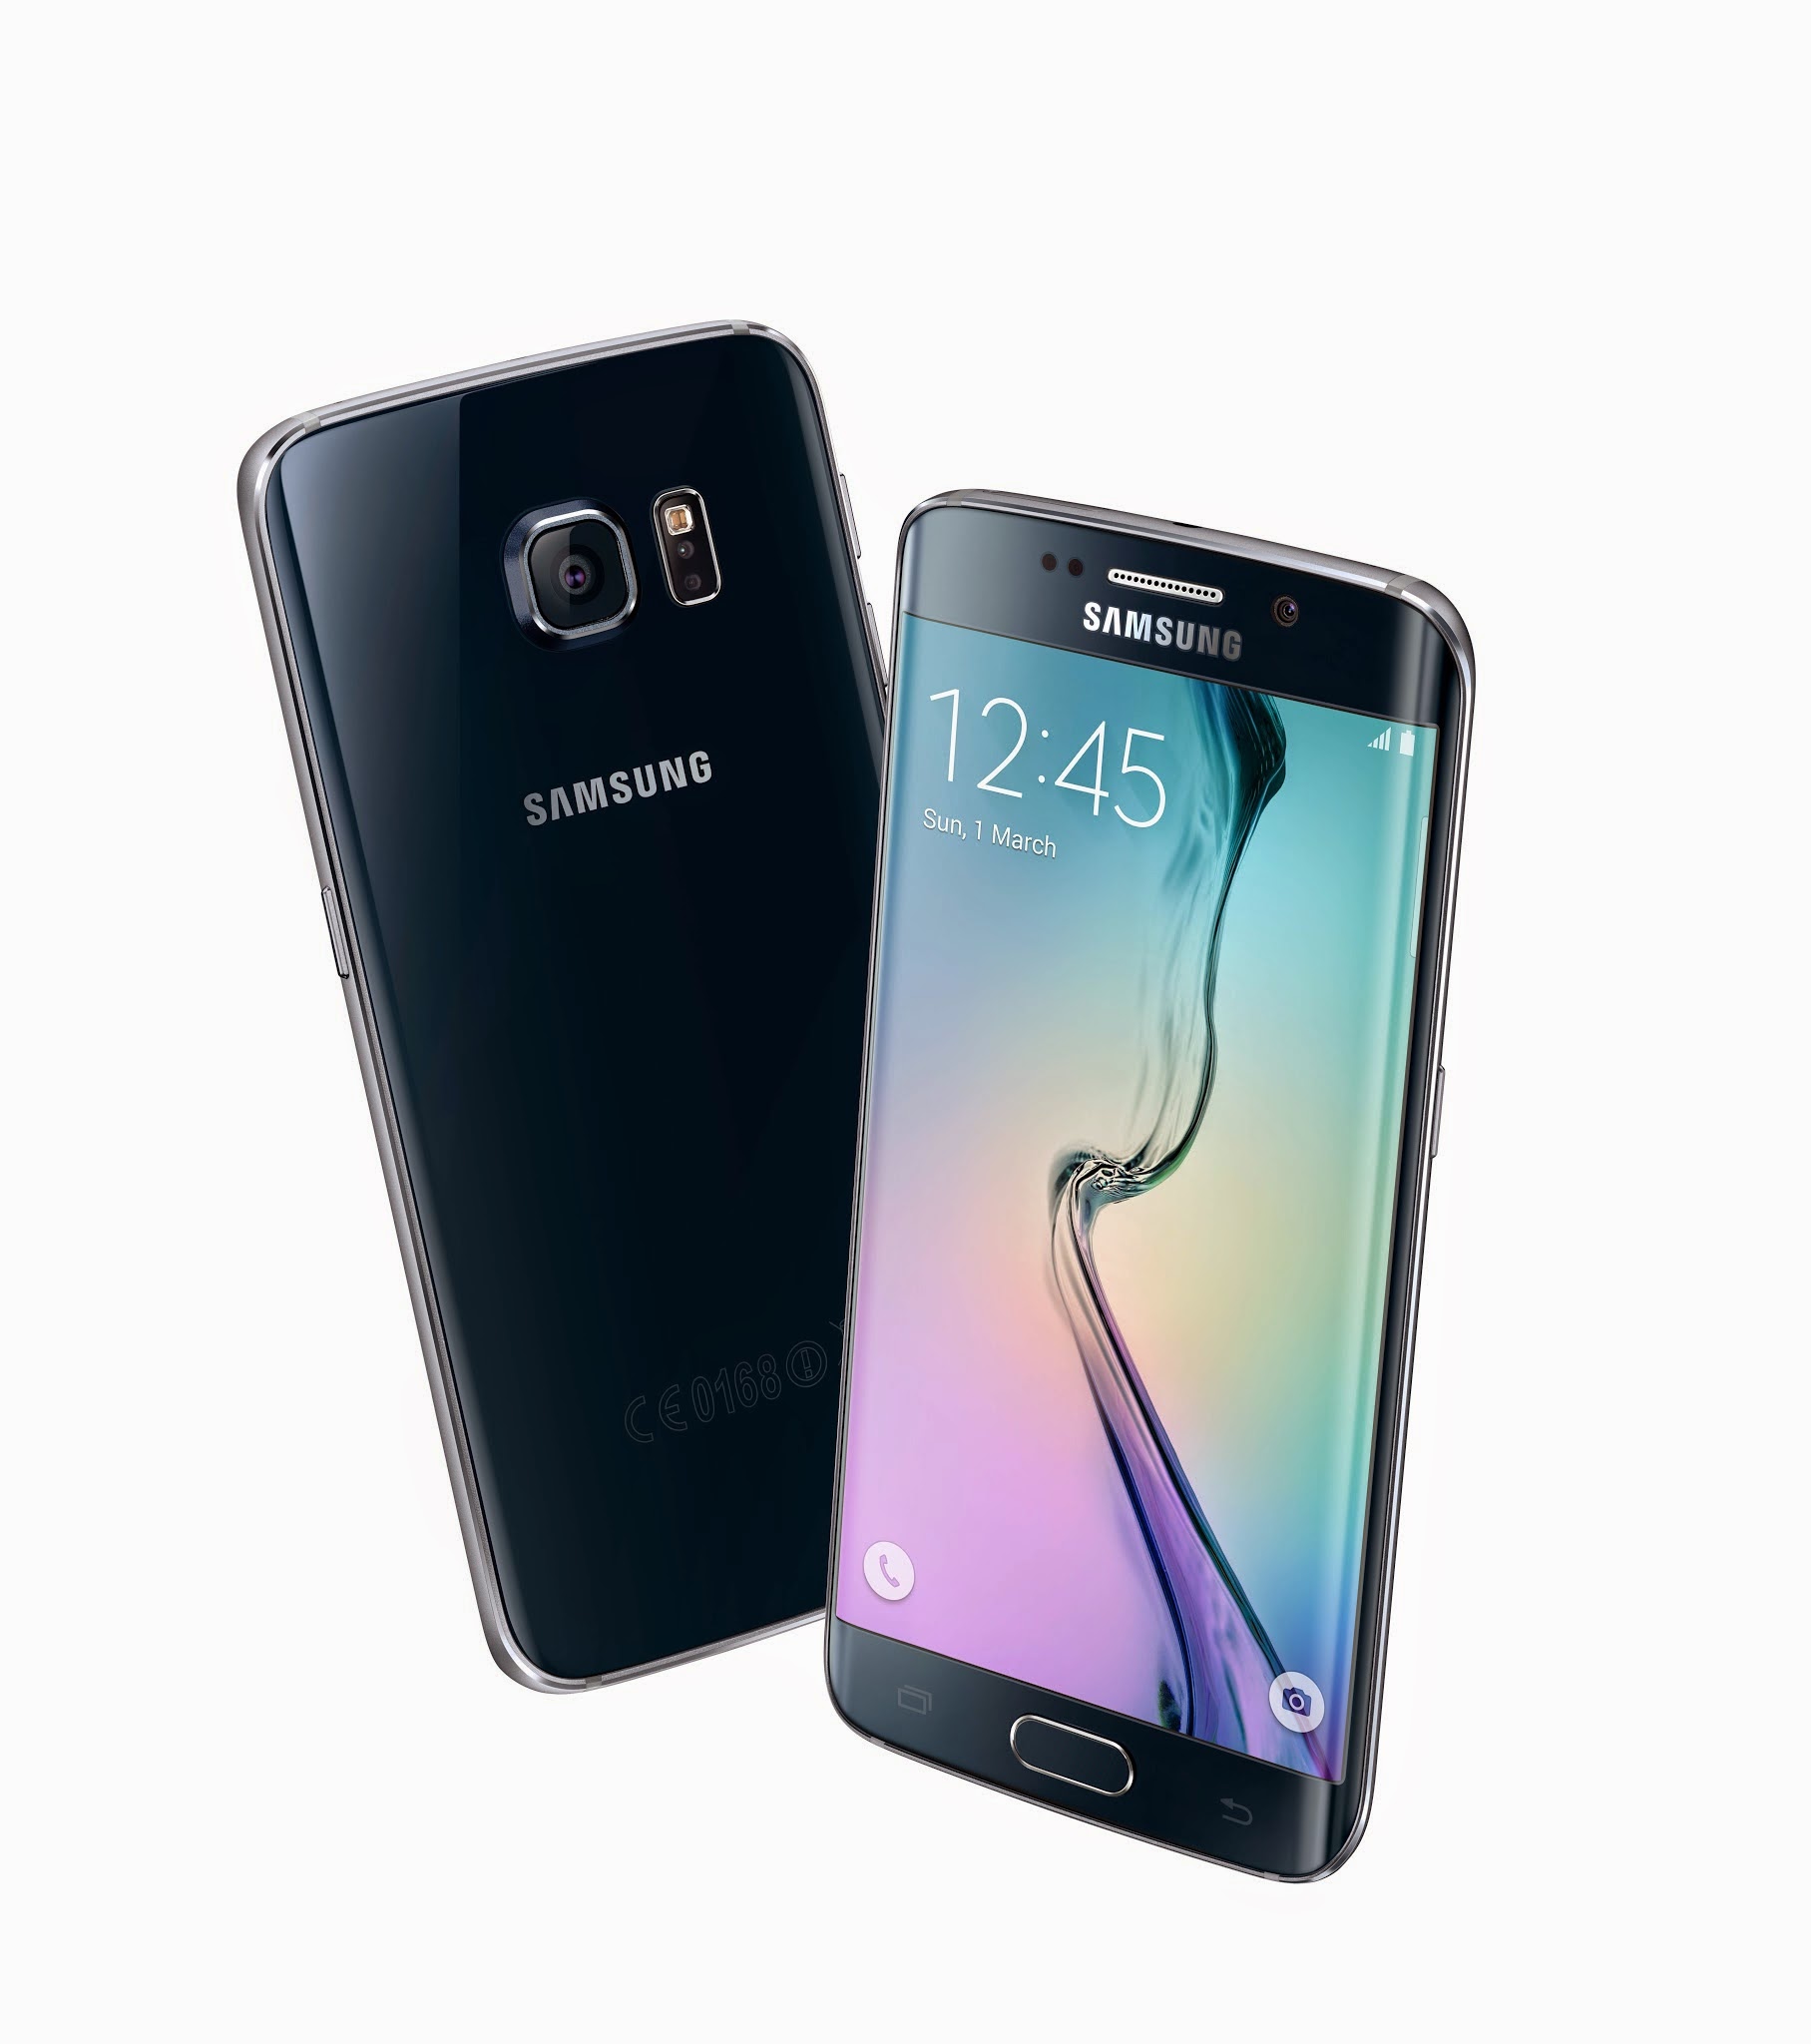 #MWC2015 - Samsung officialise le Galaxy S6 Edge